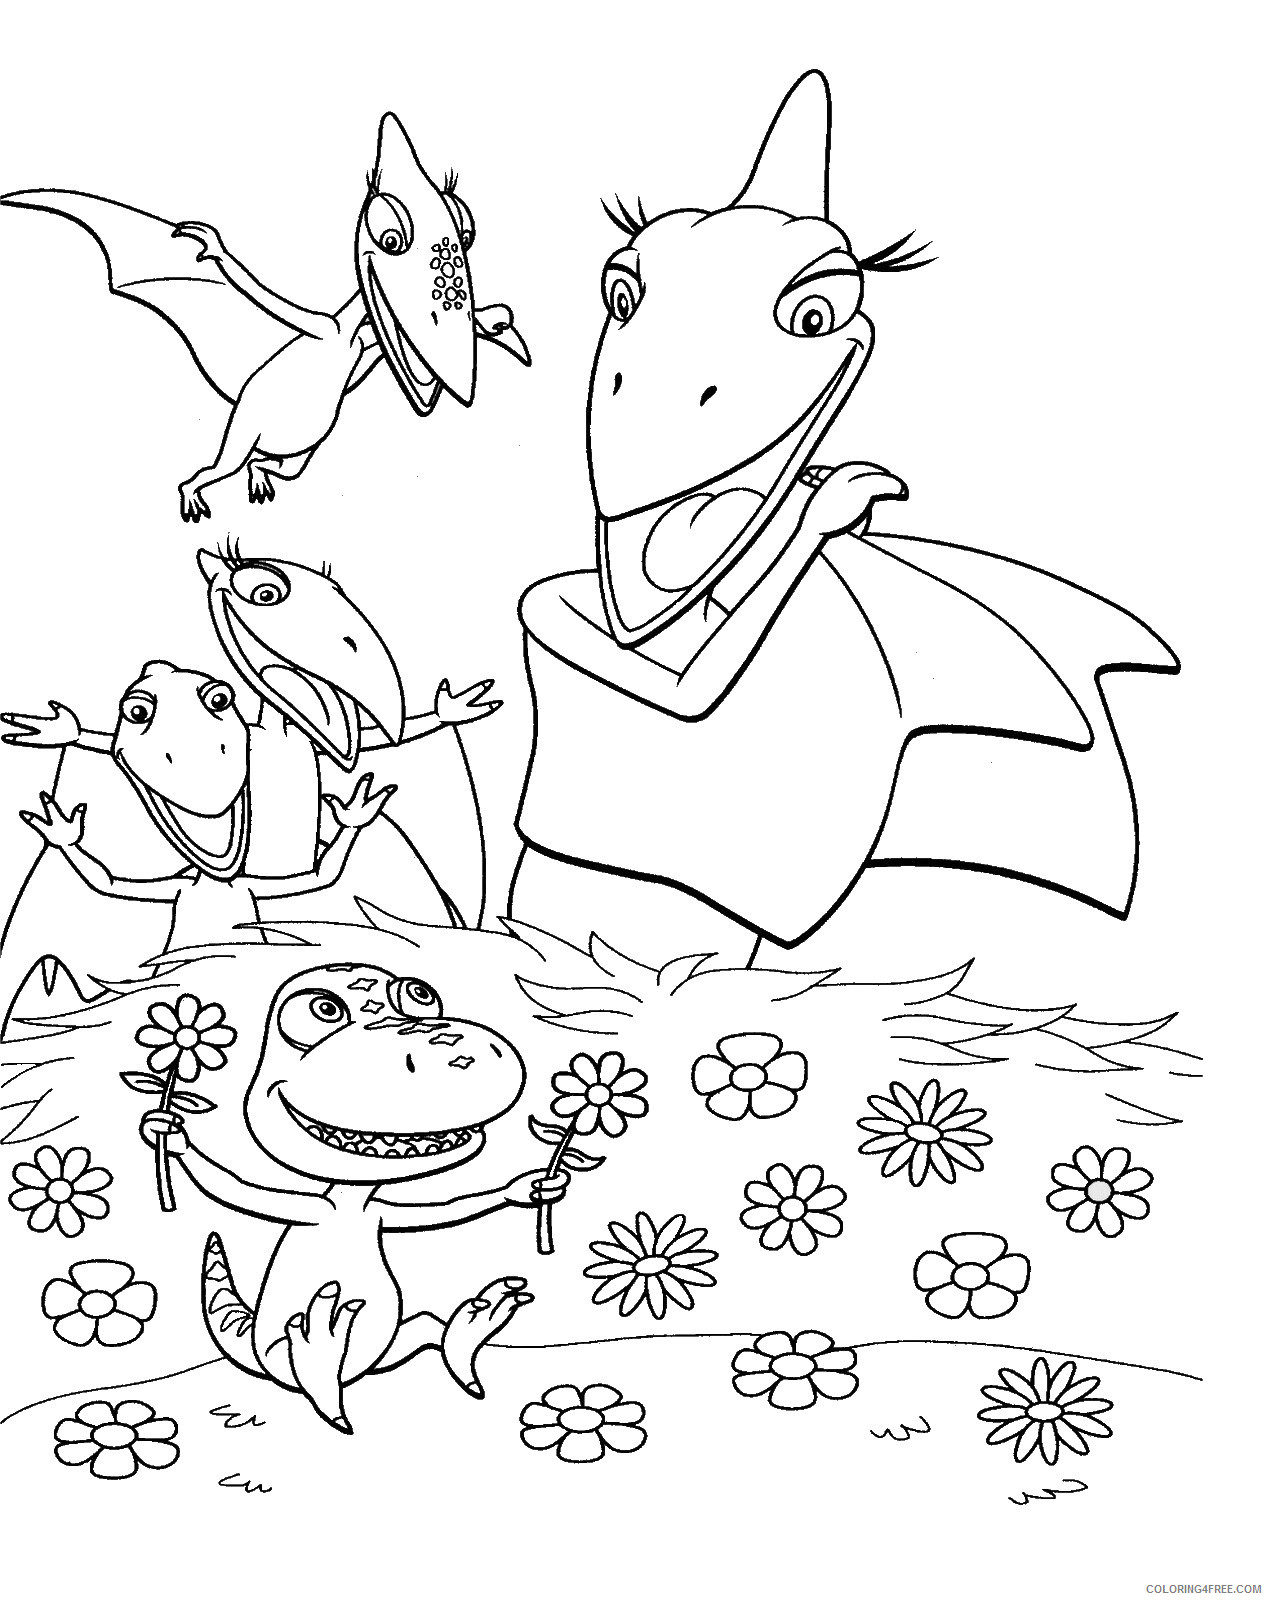 Dinosaur Train Coloring Pages Cartoons dino_train_cl_29 Printable 2020 2250 Coloring4free